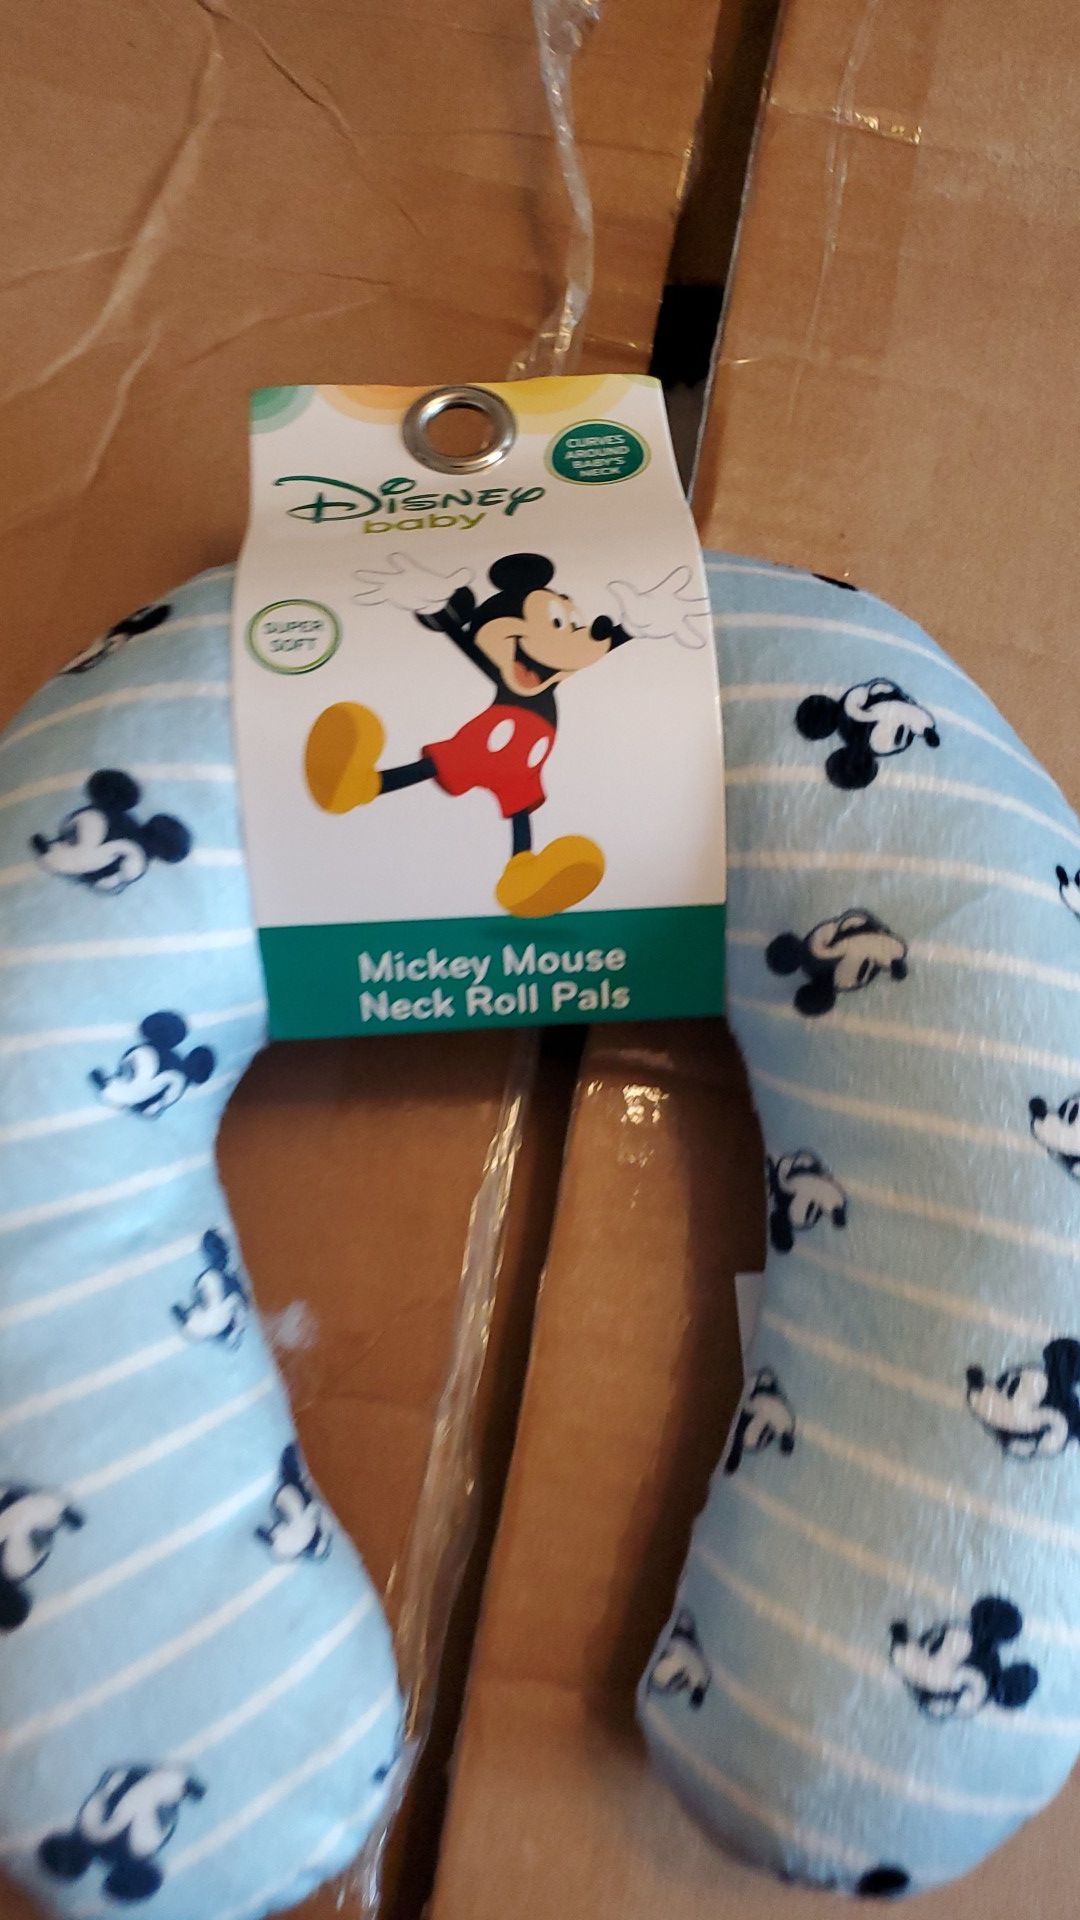 Disney Baby Mickey Mouse Neck Pillow